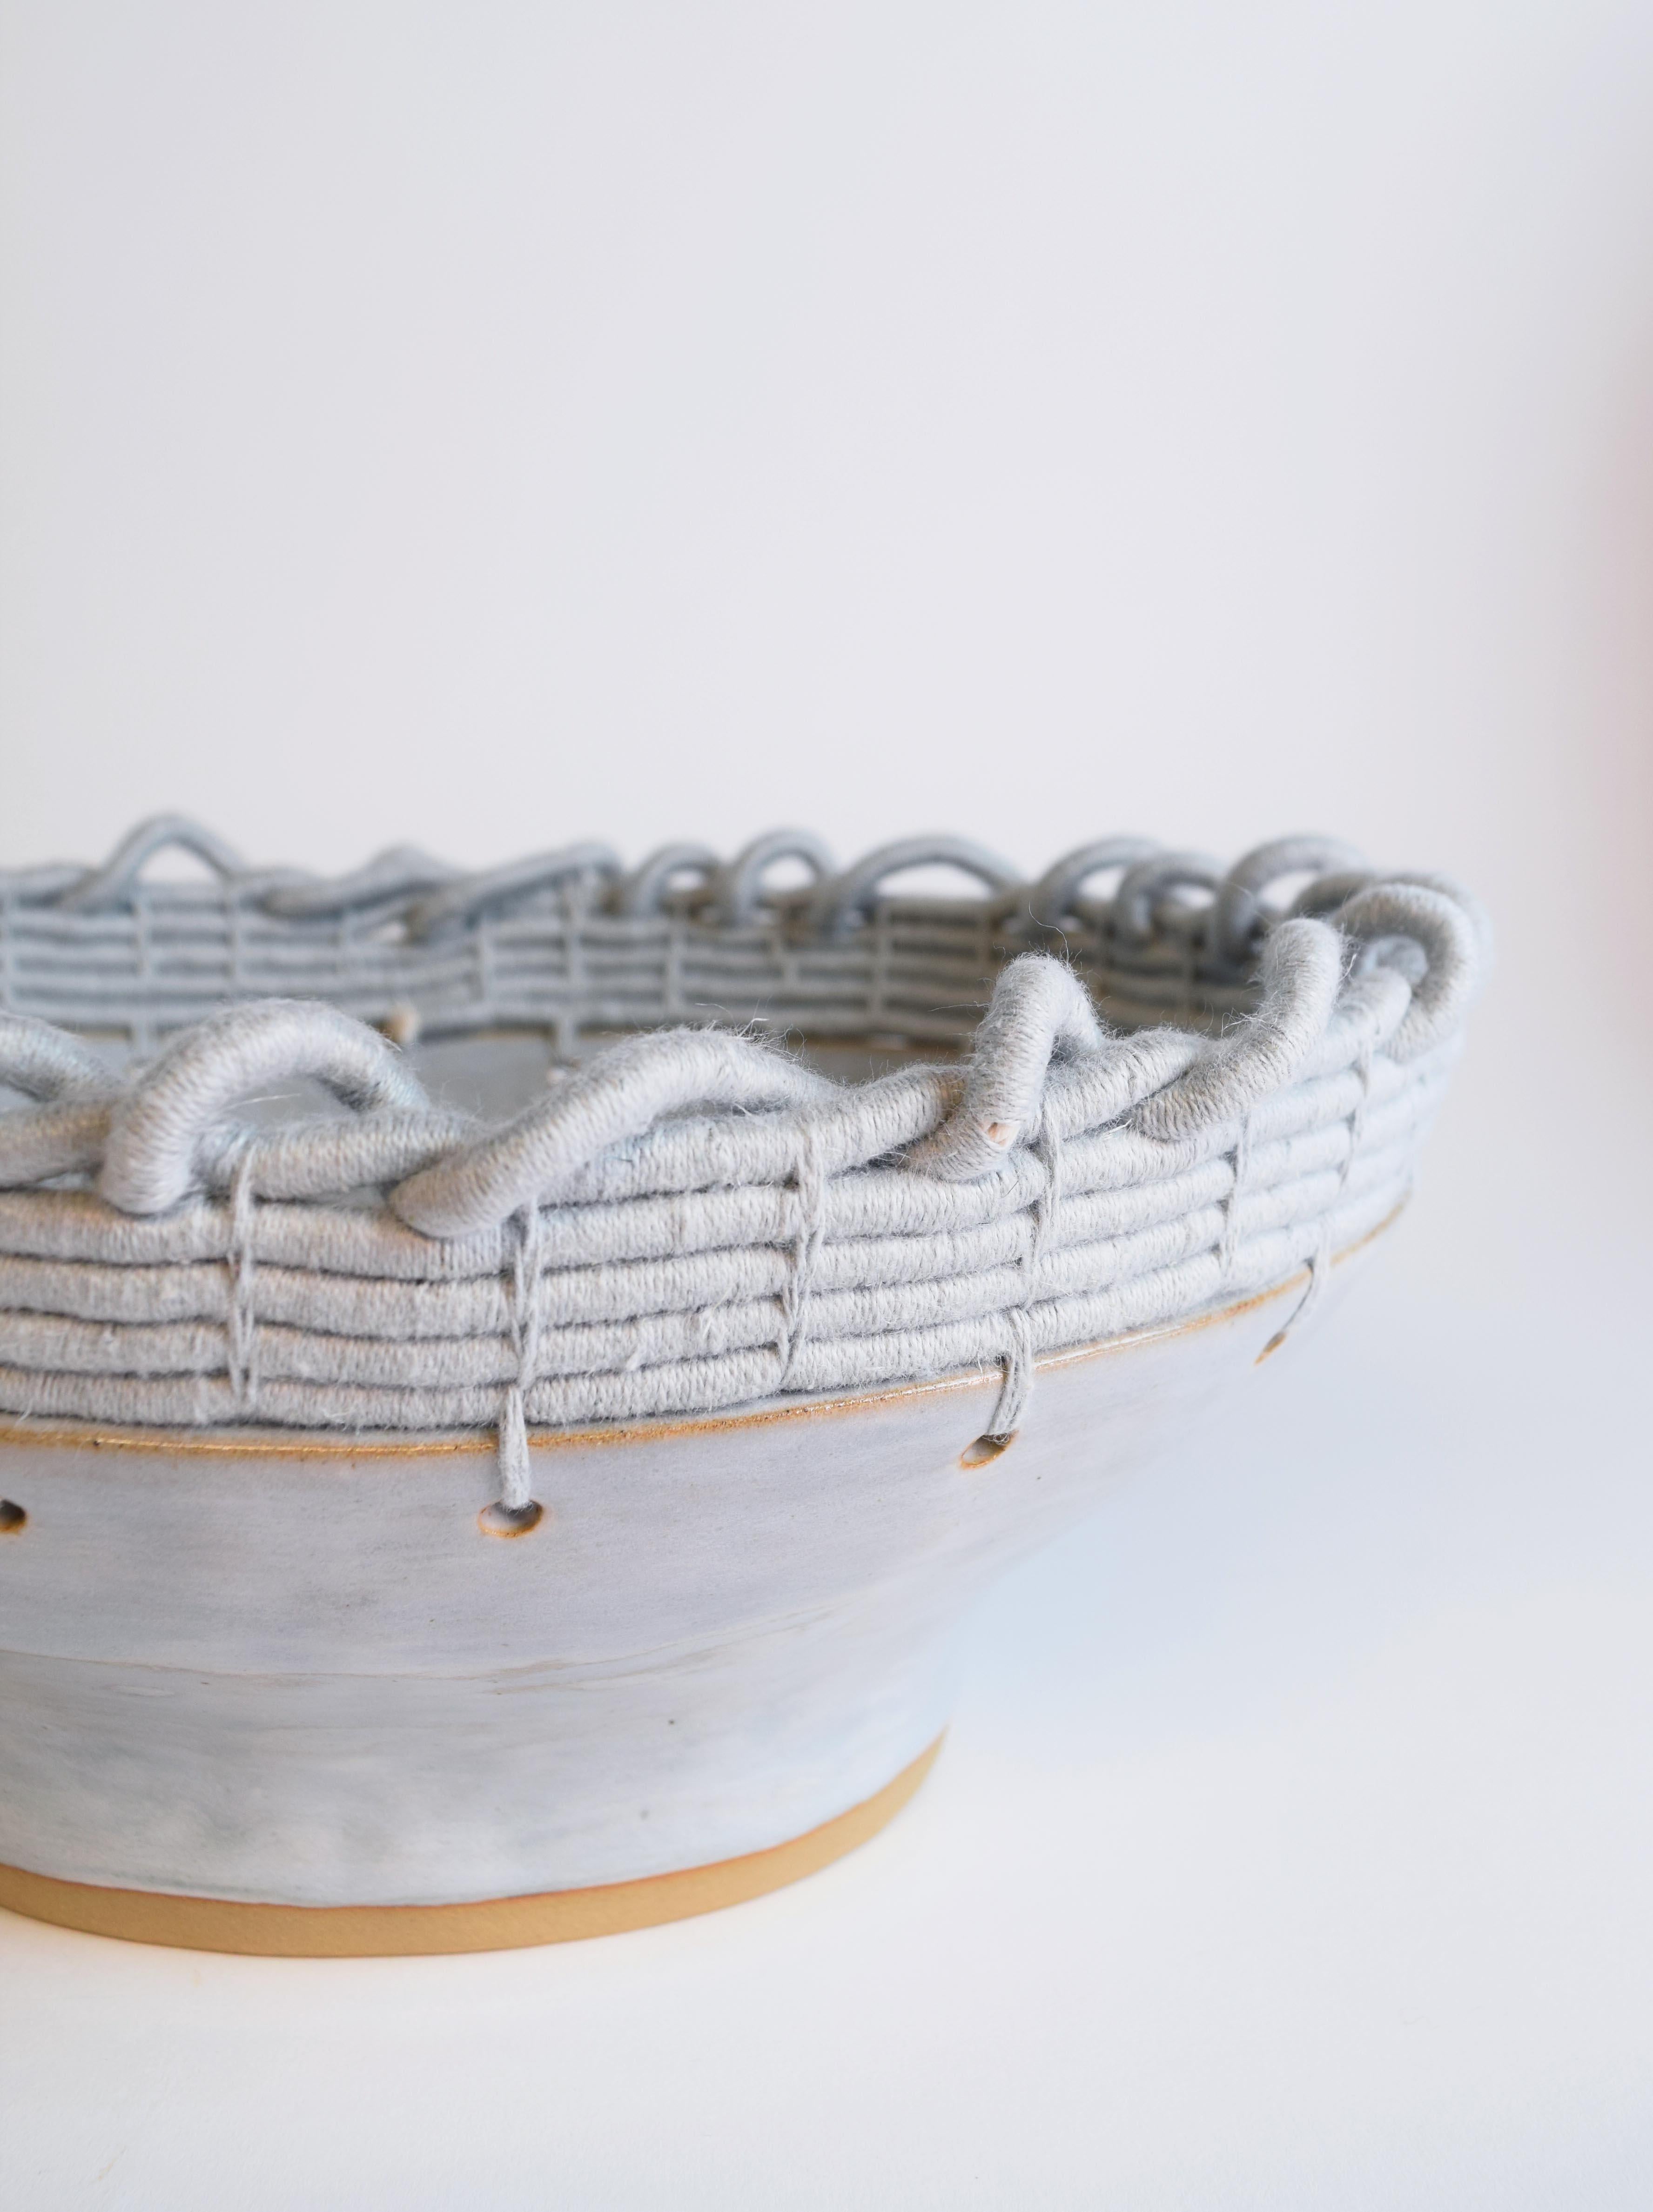 Hand-Crafted One of a Kind Handmade Ceramic Bowl #782, Light Blue Glaze & Woven Cotton Upper